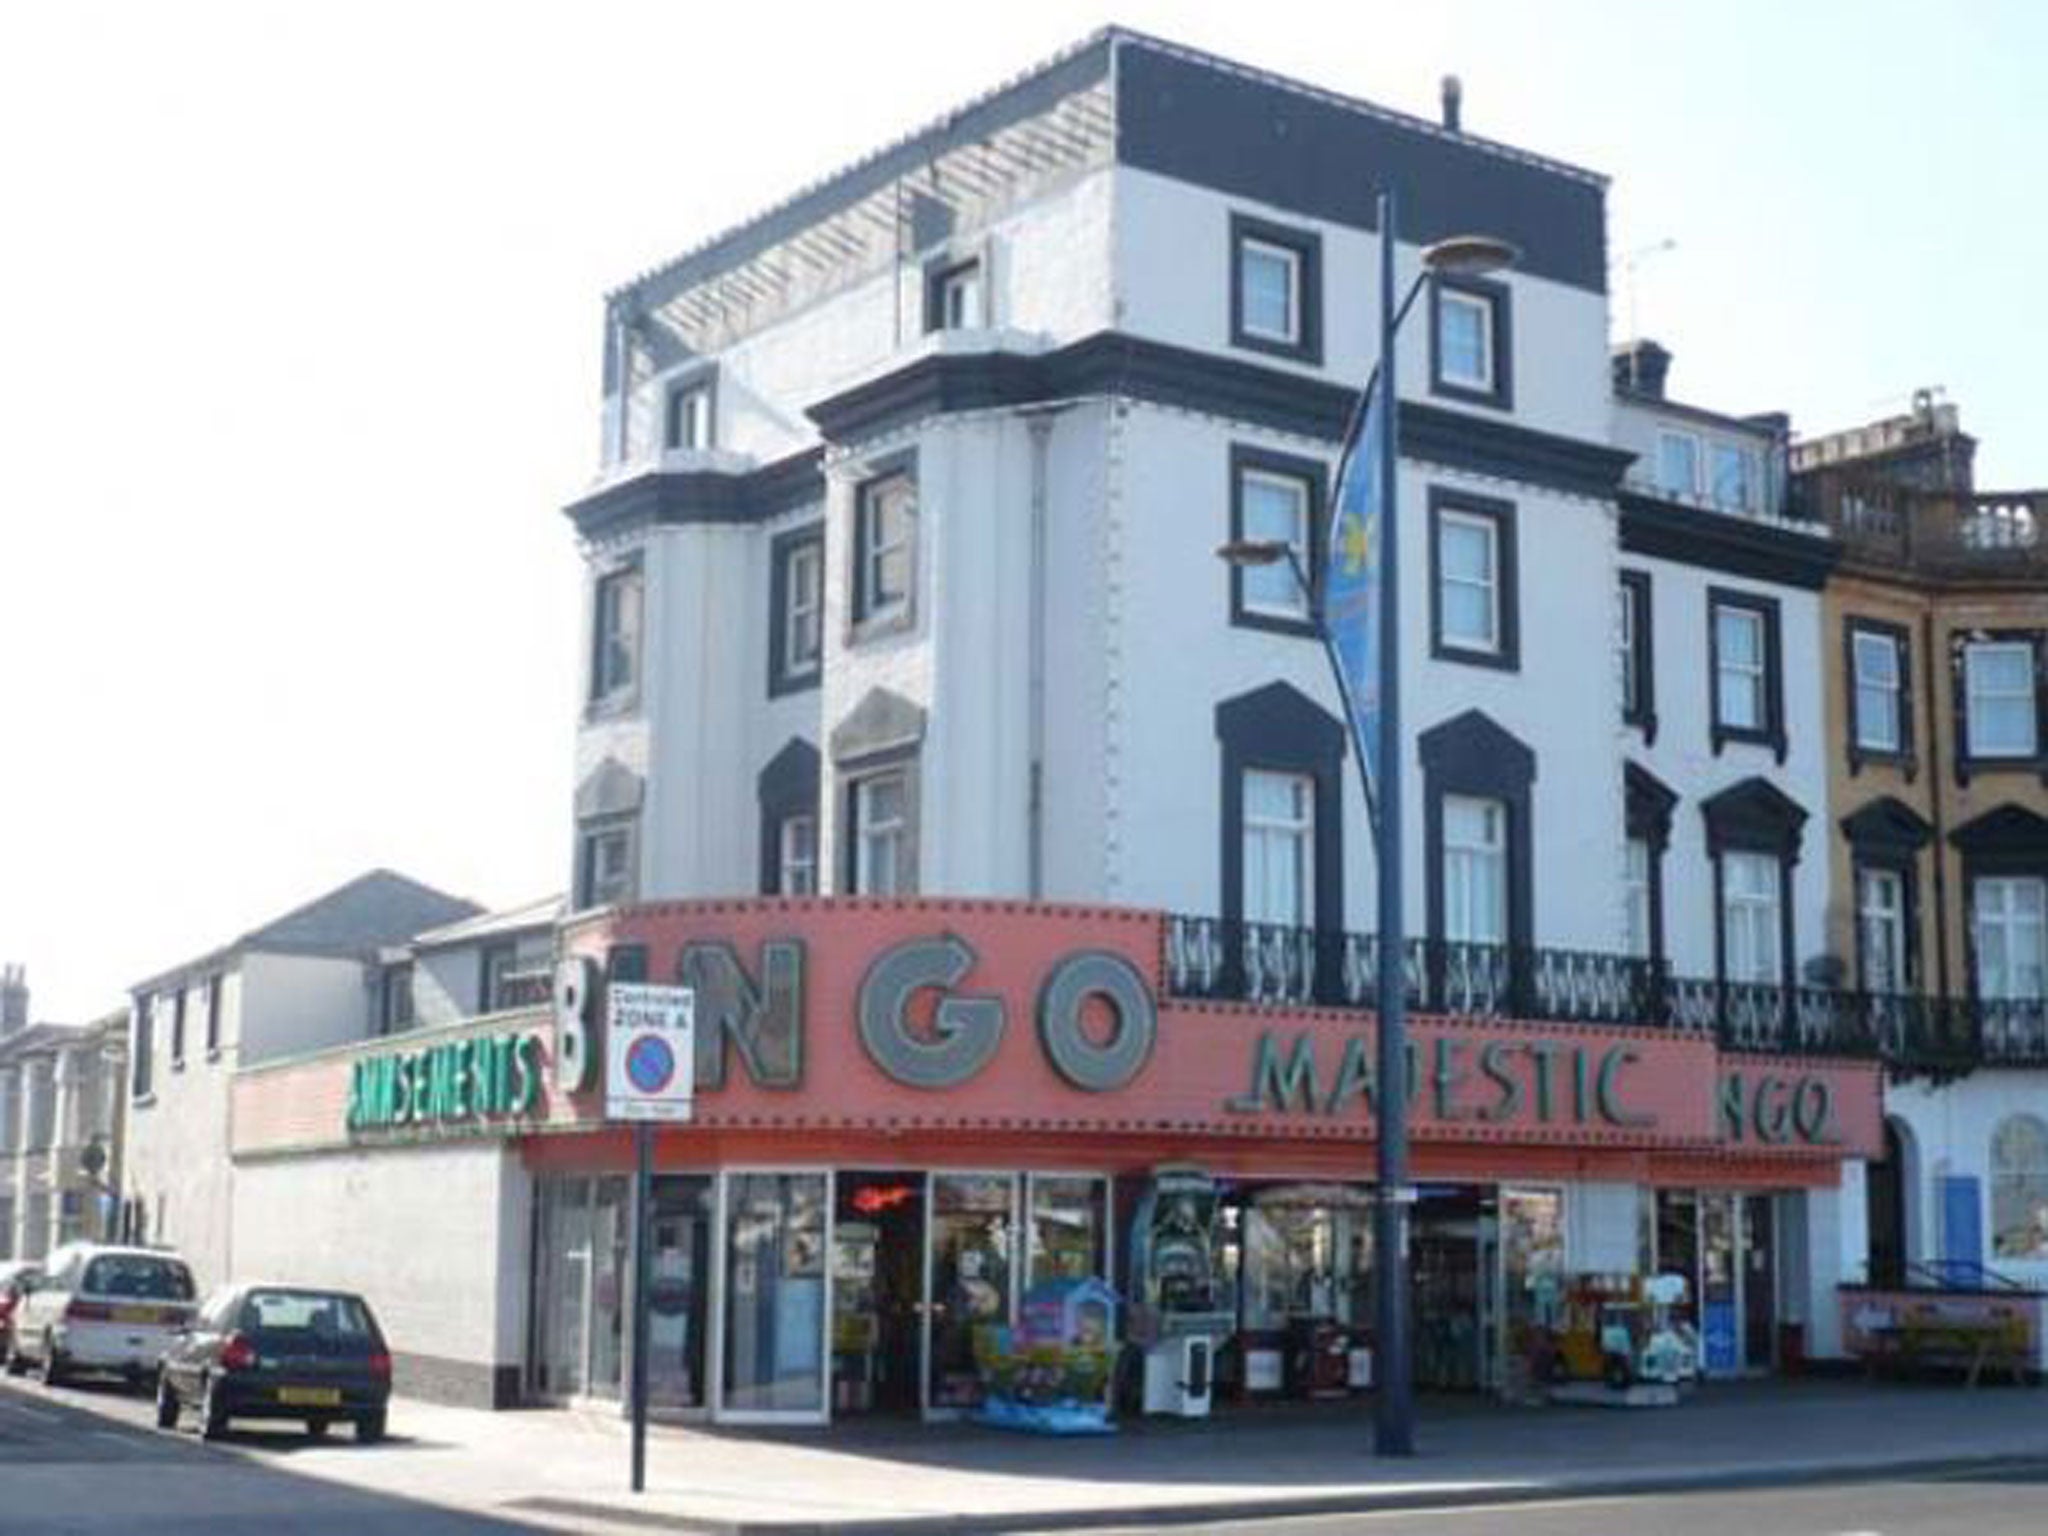 Bingo hall for sale in Marine Parade, Great Yarmouth NR30. On for £725,000 with Aldreds.